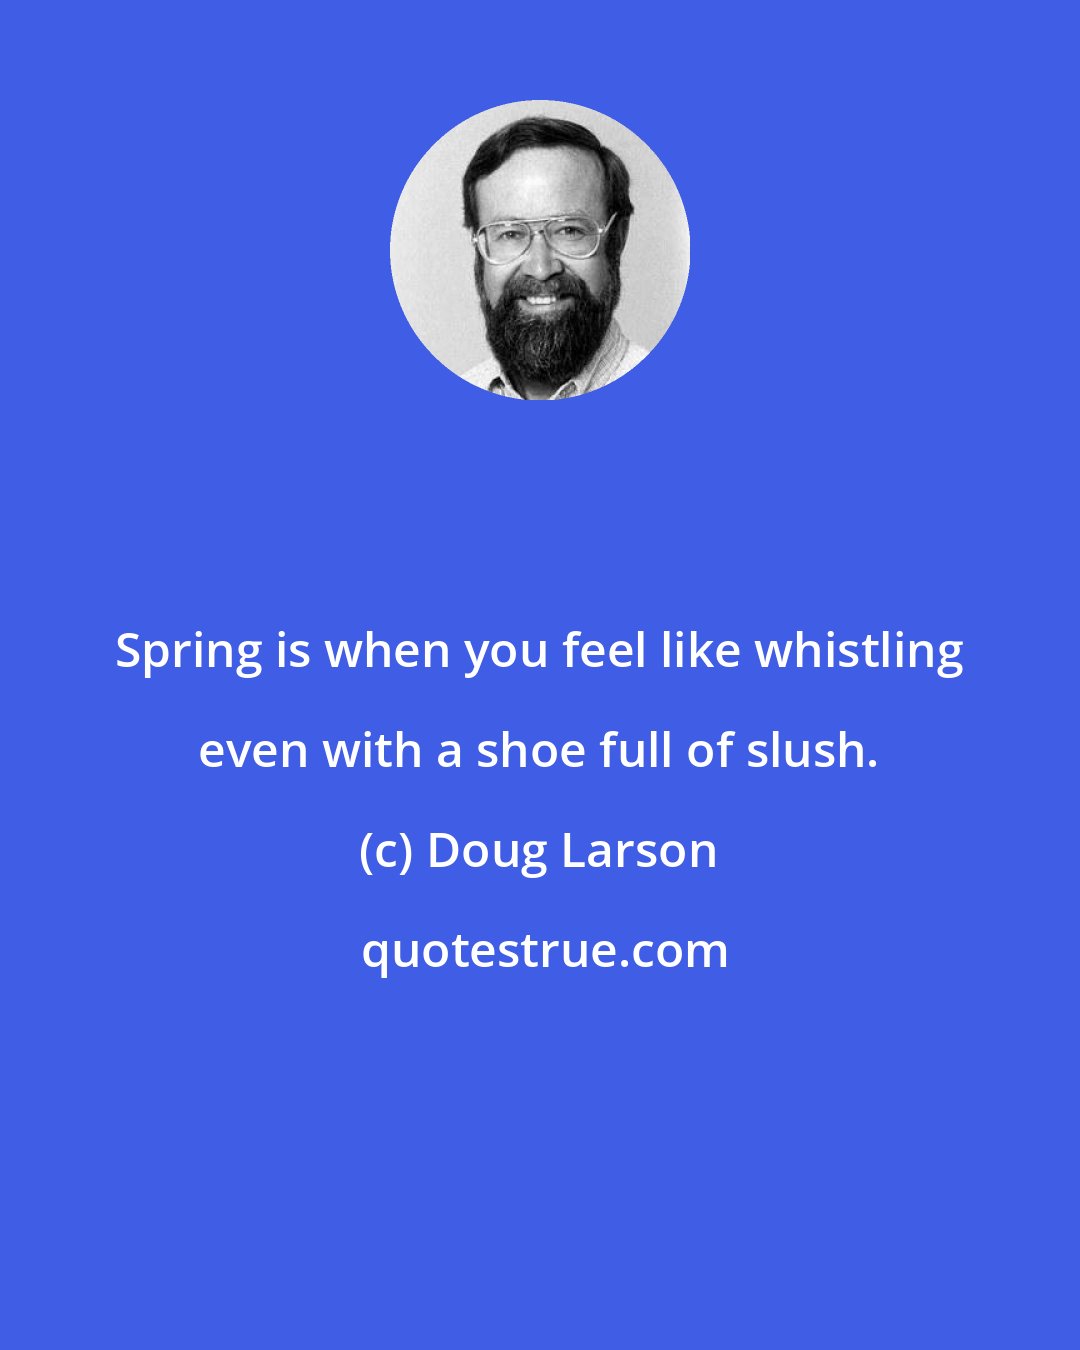 Doug Larson: Spring is when you feel like whistling even with a shoe full of slush.